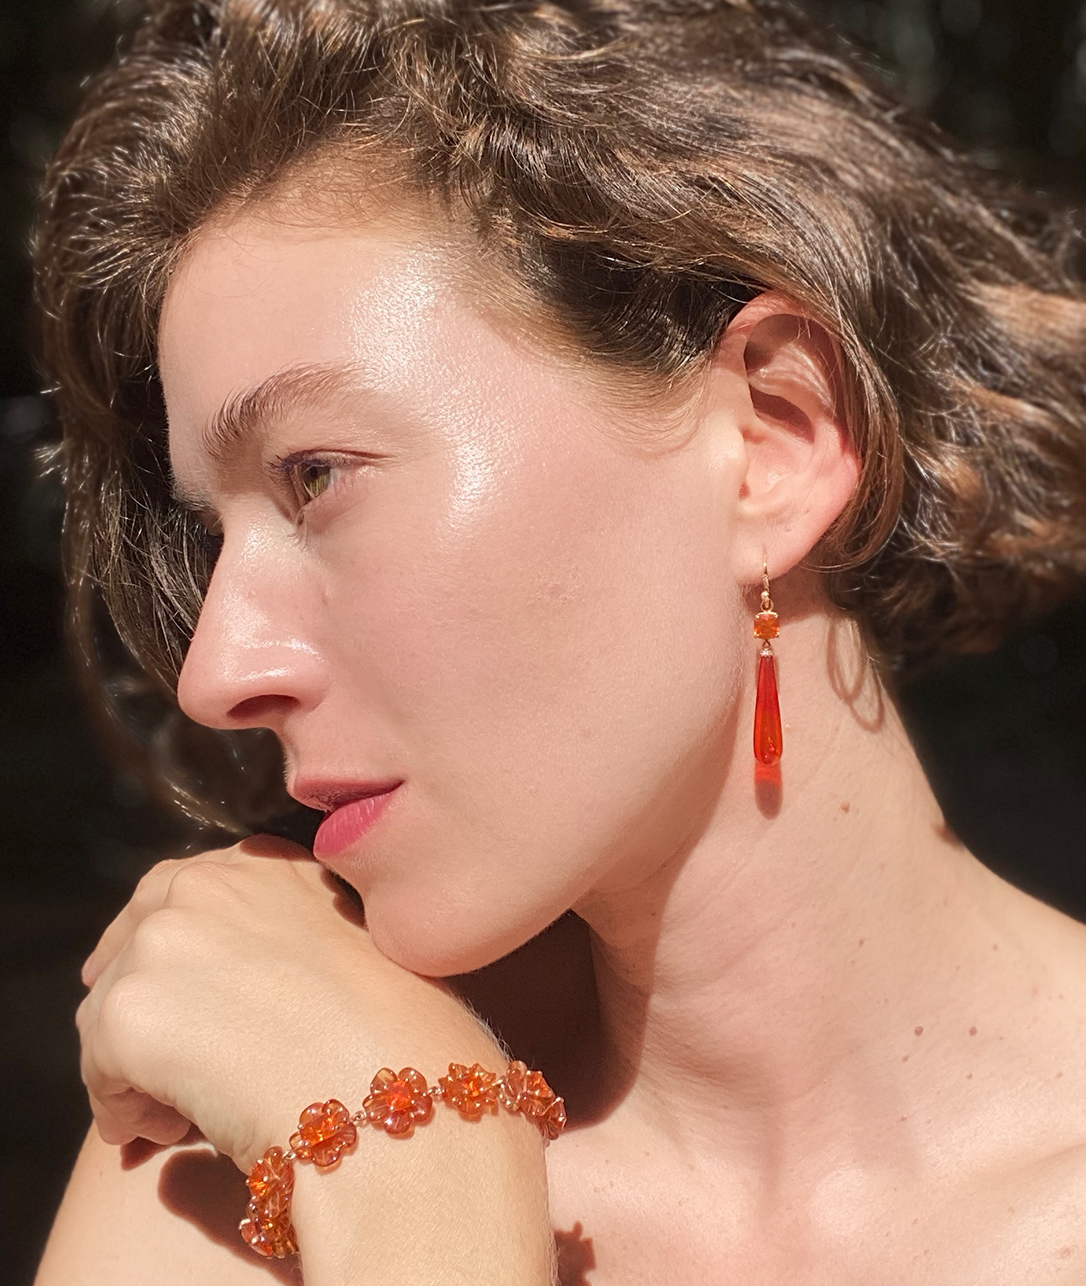 Treasured for its striking shades of bright red, orange, and yellow, fire opal has become imbued with meaning from being a gemstone of protection and healing to a symbol of love, hope, happiness, and truth.